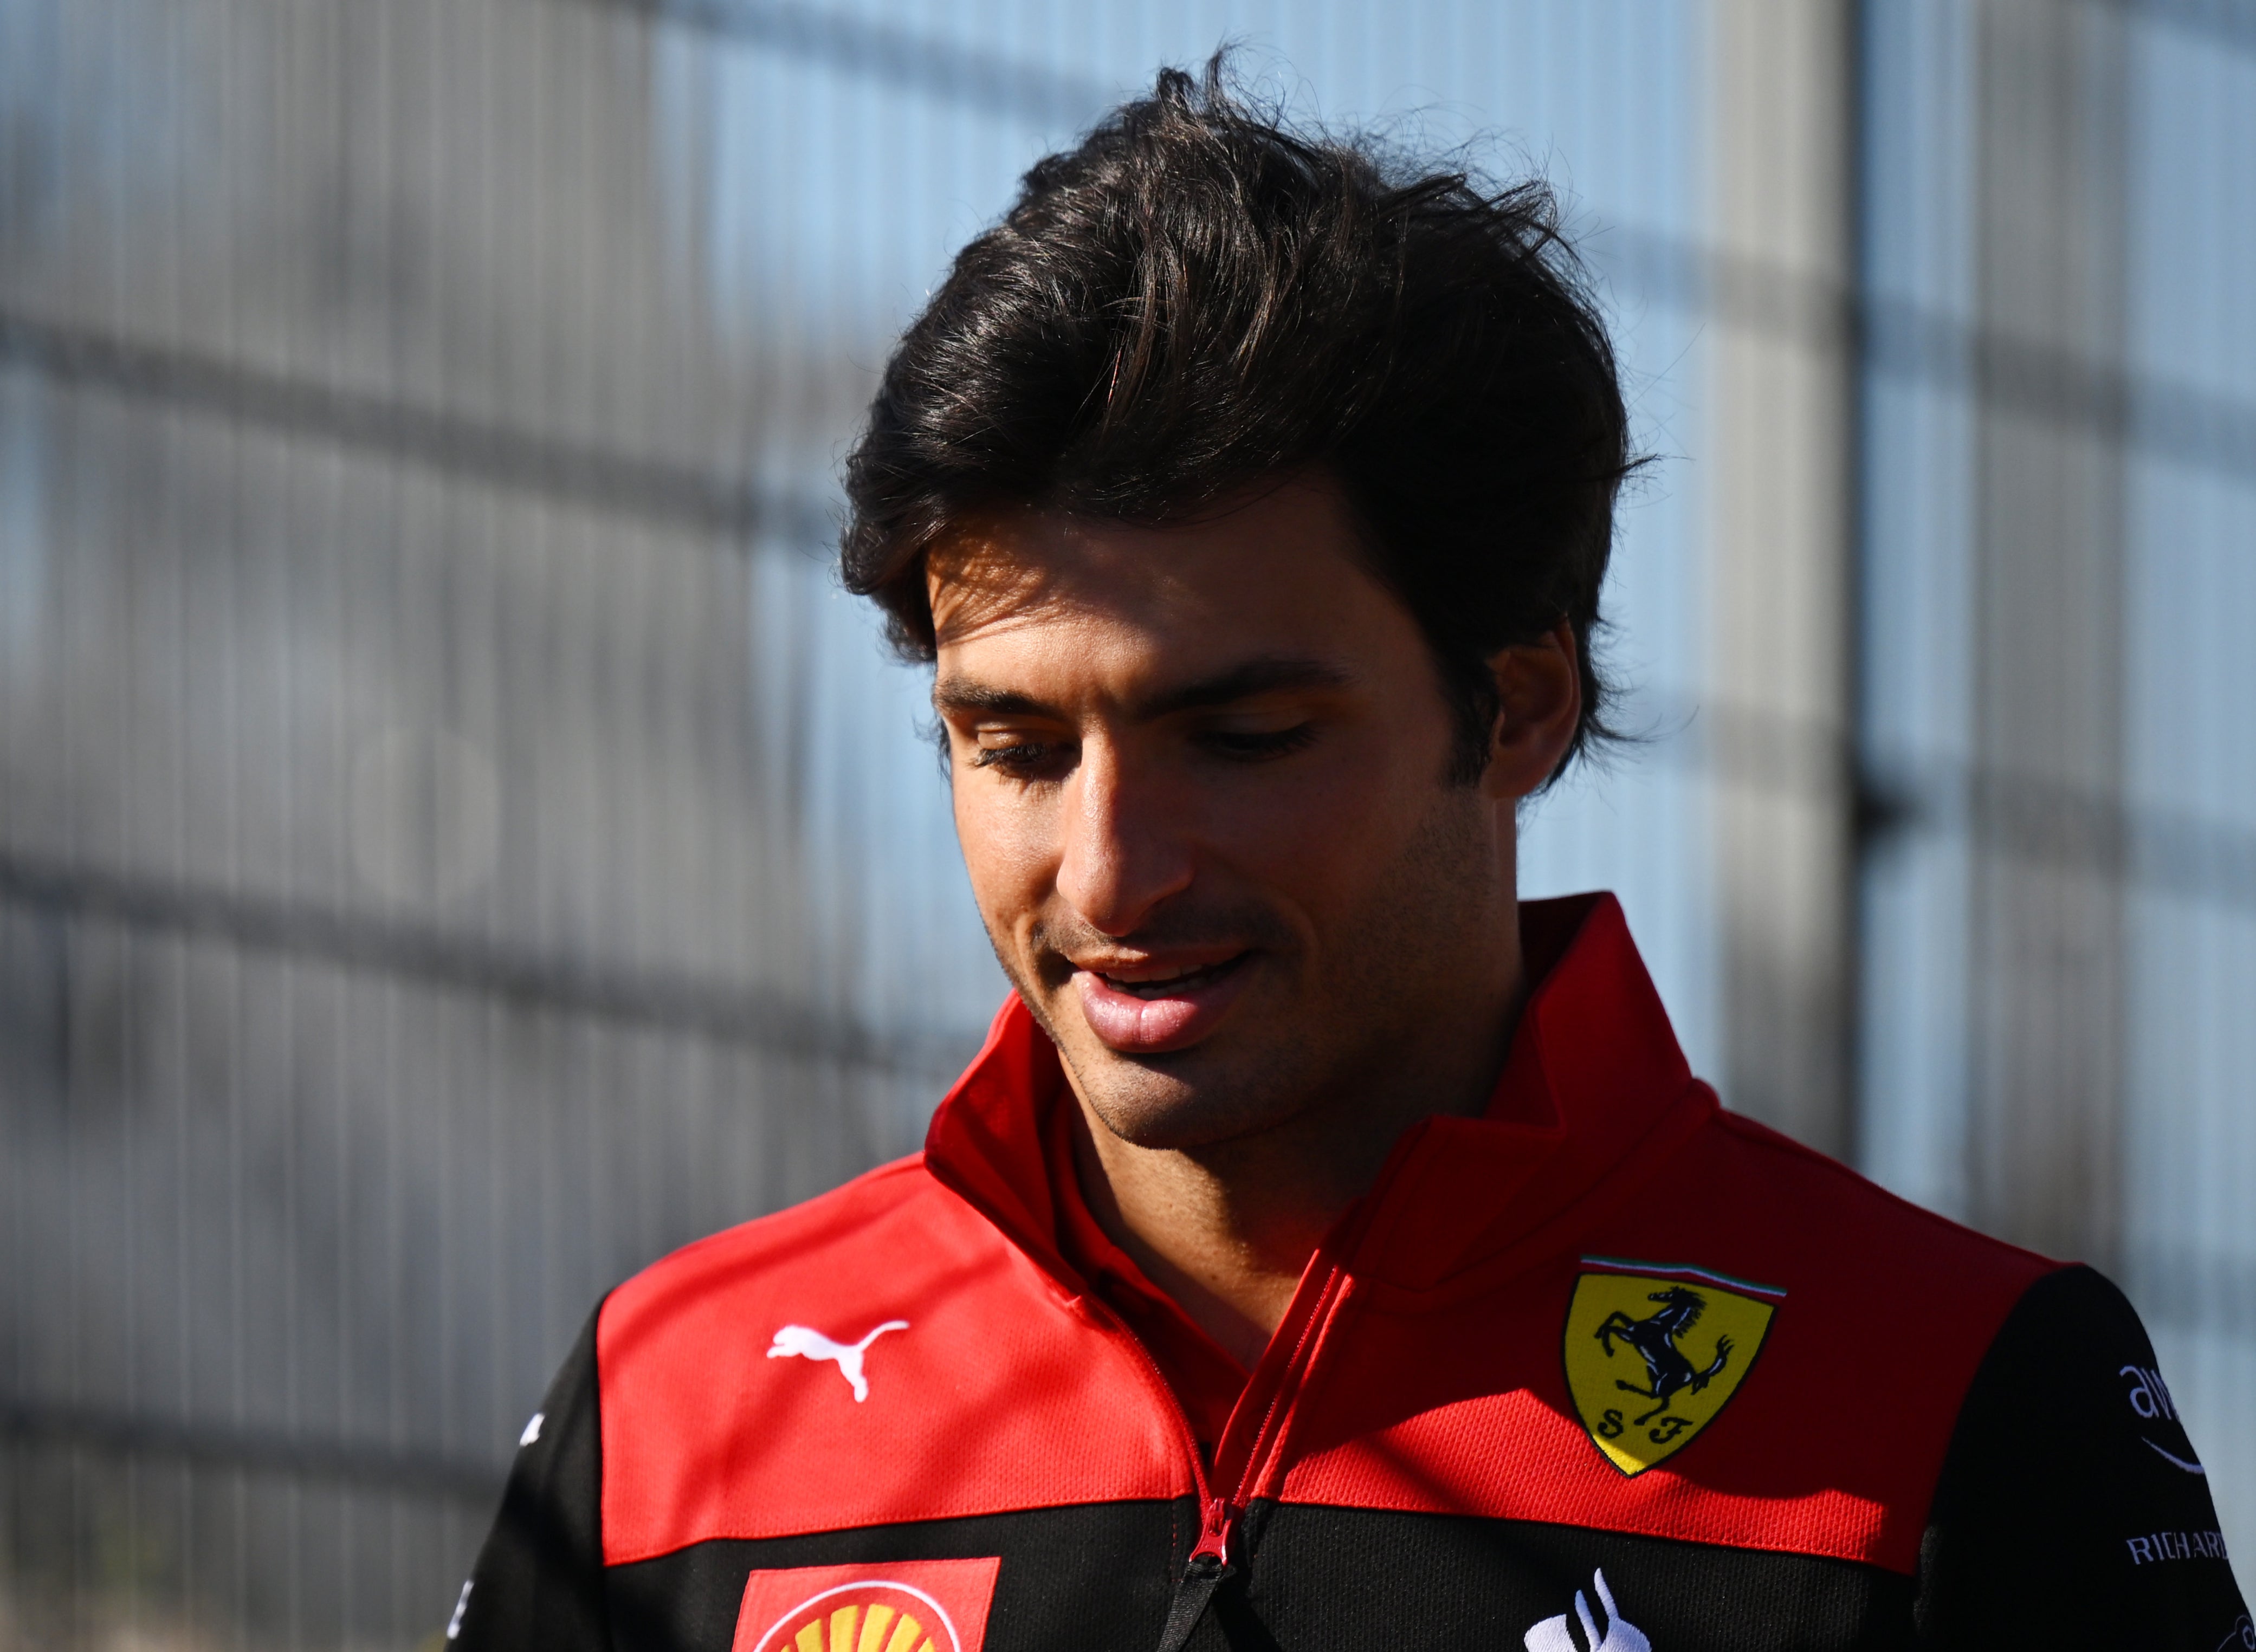 Carlos Sainz believes Ferrari can close the gap to Red Bull this weekend at Zandvoort